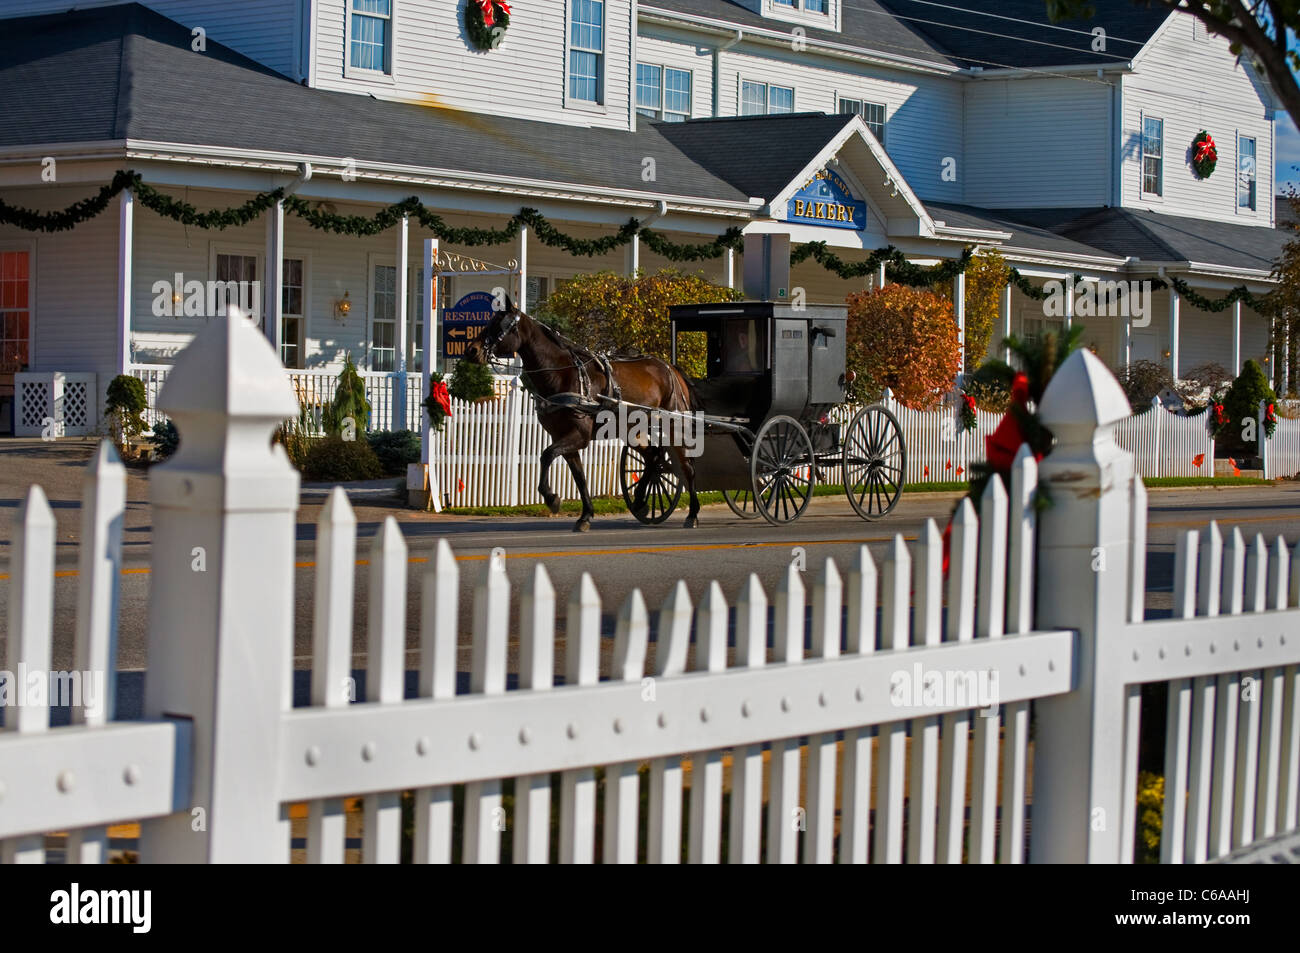 Amish buggy passing by the famous Blue Gate Restaurant and Bakery, popular for its Amish food, in Shipshewana, Indiana. Stock Photo